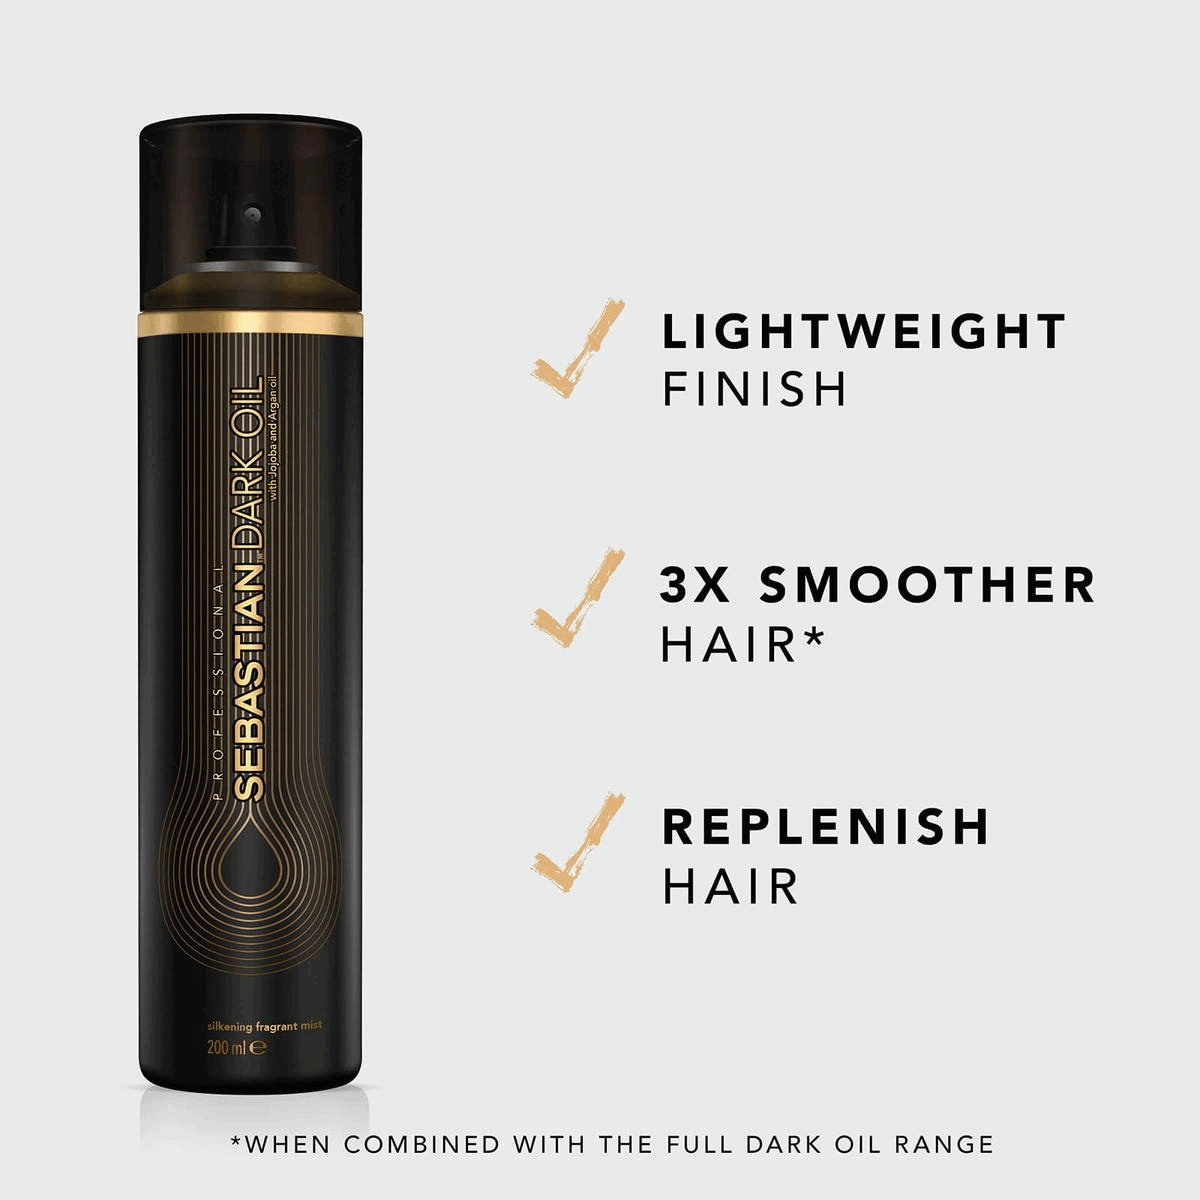 Lightweight finish x3 smoother hair* *when combined with the full dark oil range Replenish hair. To accentuate and volume Apply into damp hair Air-dry for sleek waves
              Blow-dry for tousled locks. Jojoba & argan oil